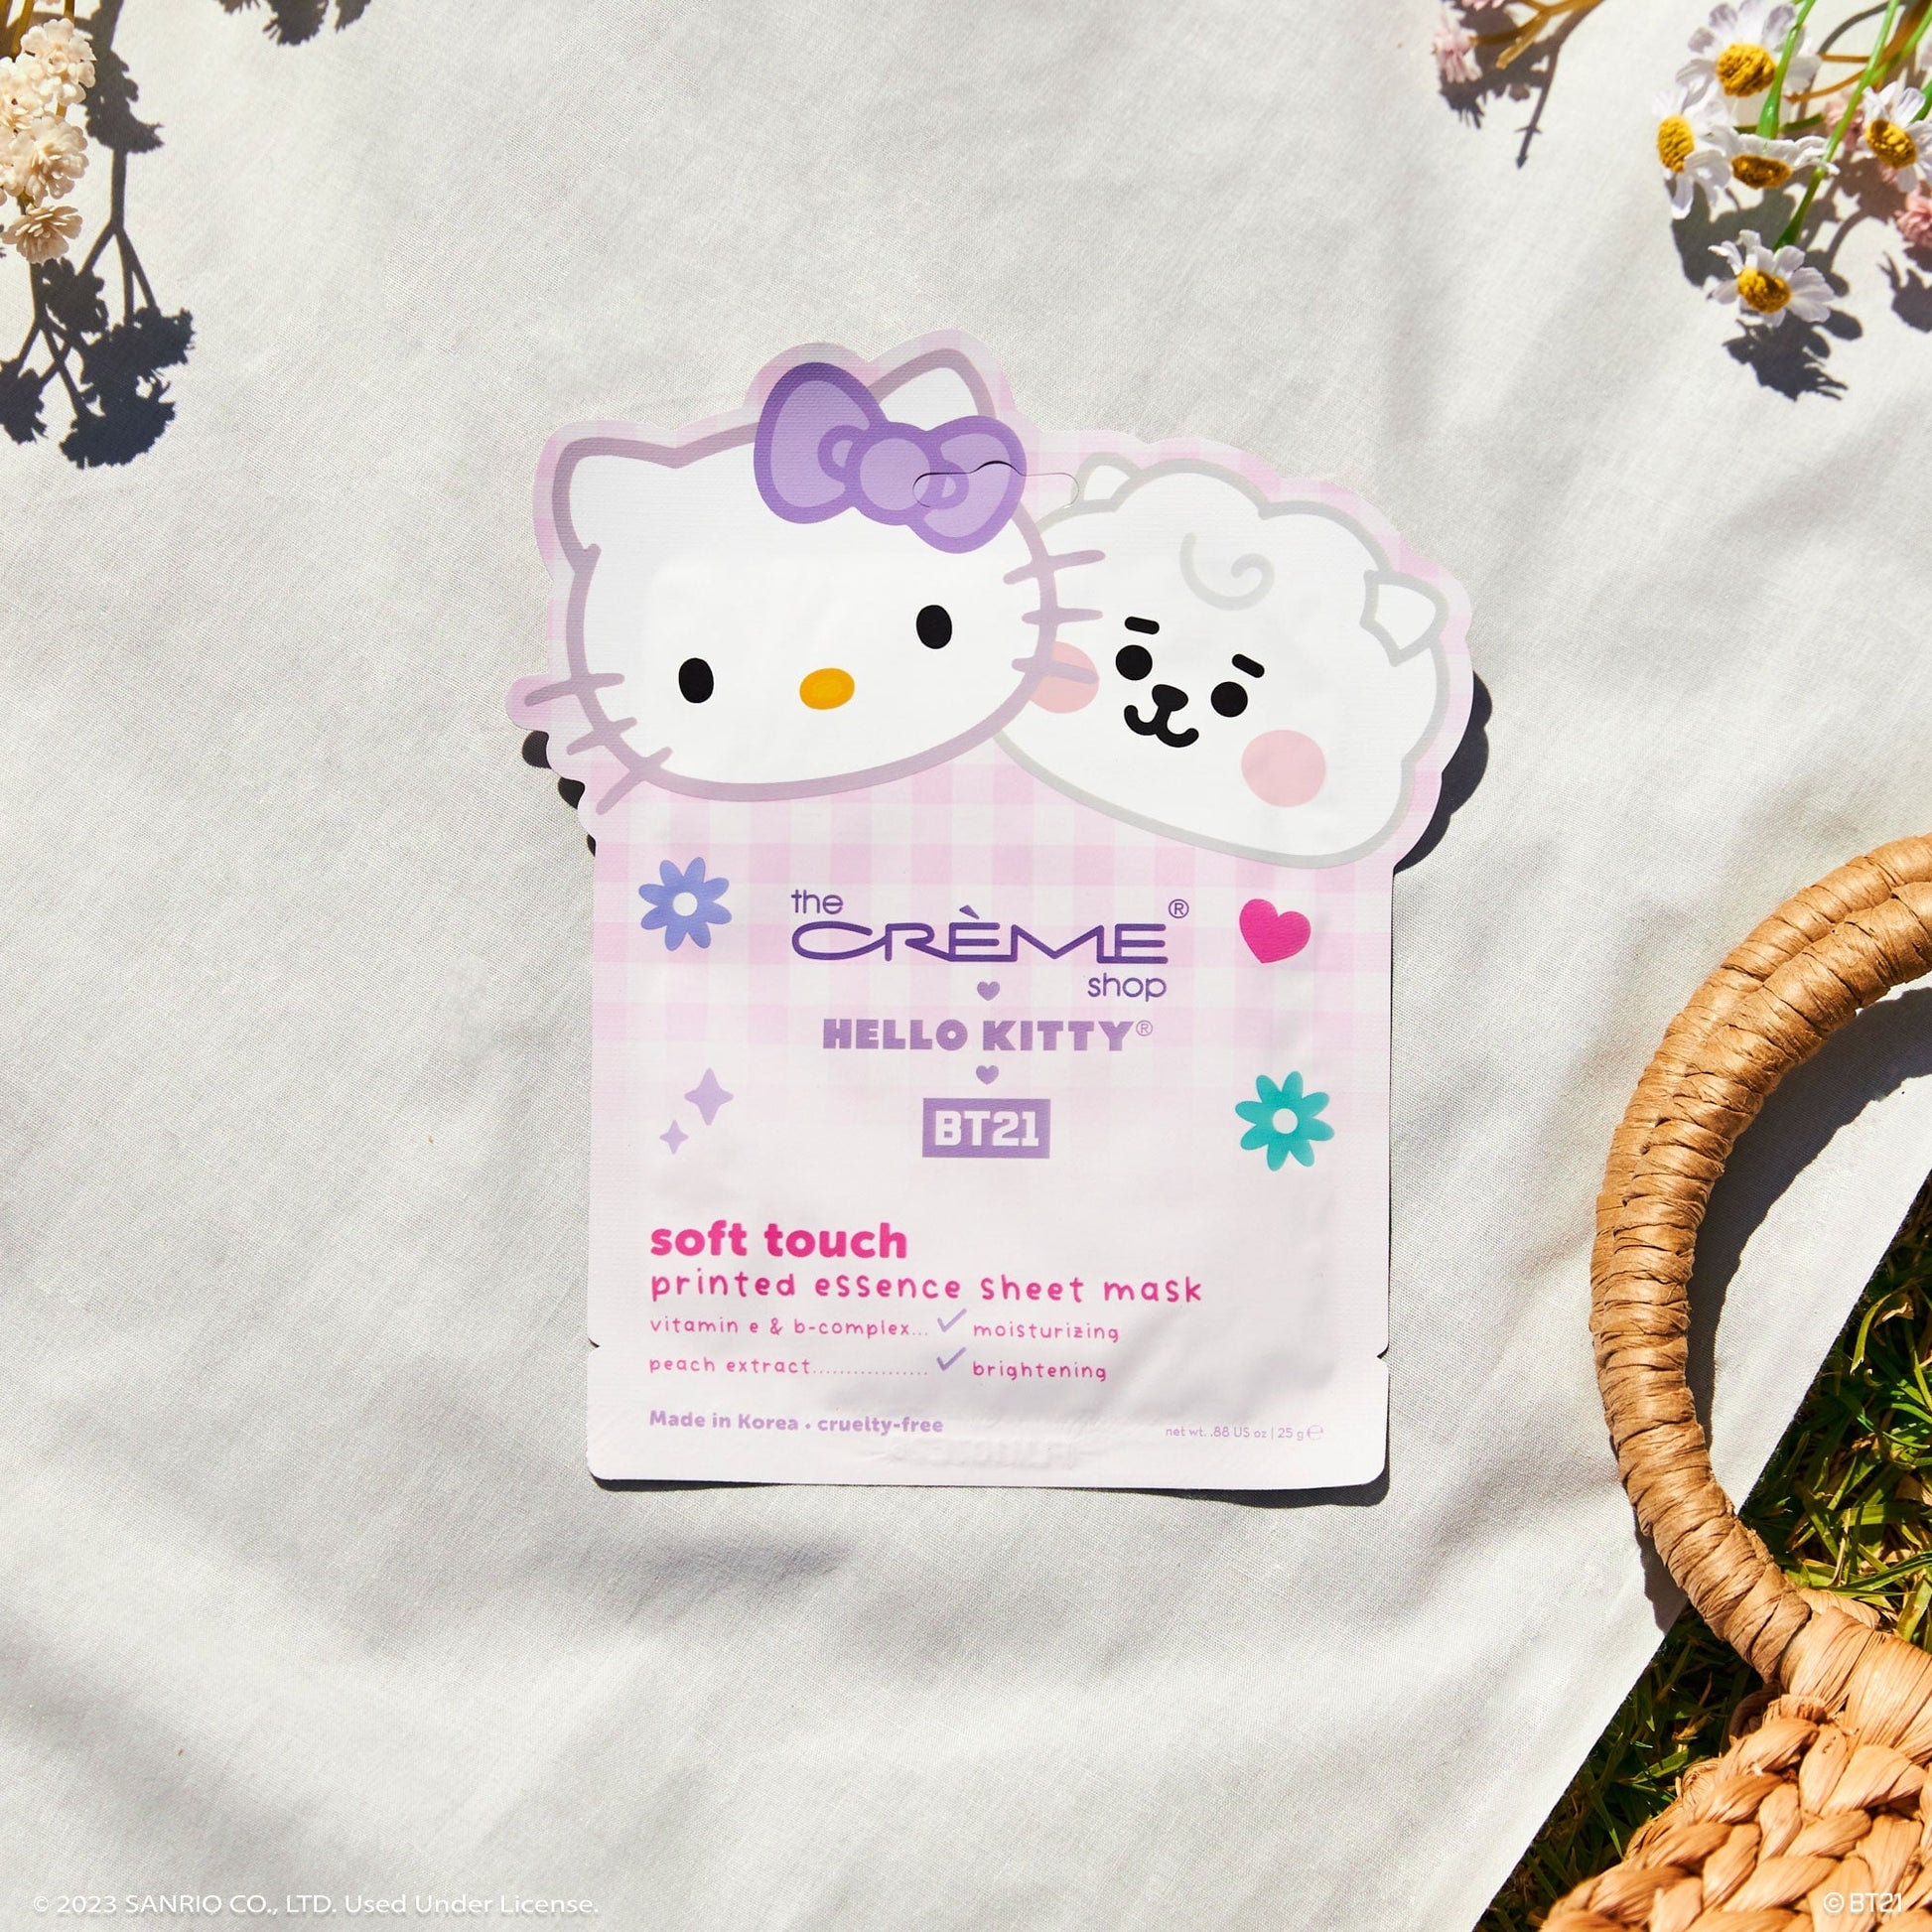 Hello Kitty & BT21 Soft Touch Printed Essence Sheet Mask with Vitamin C & B-Complex and Peach Extract, $4